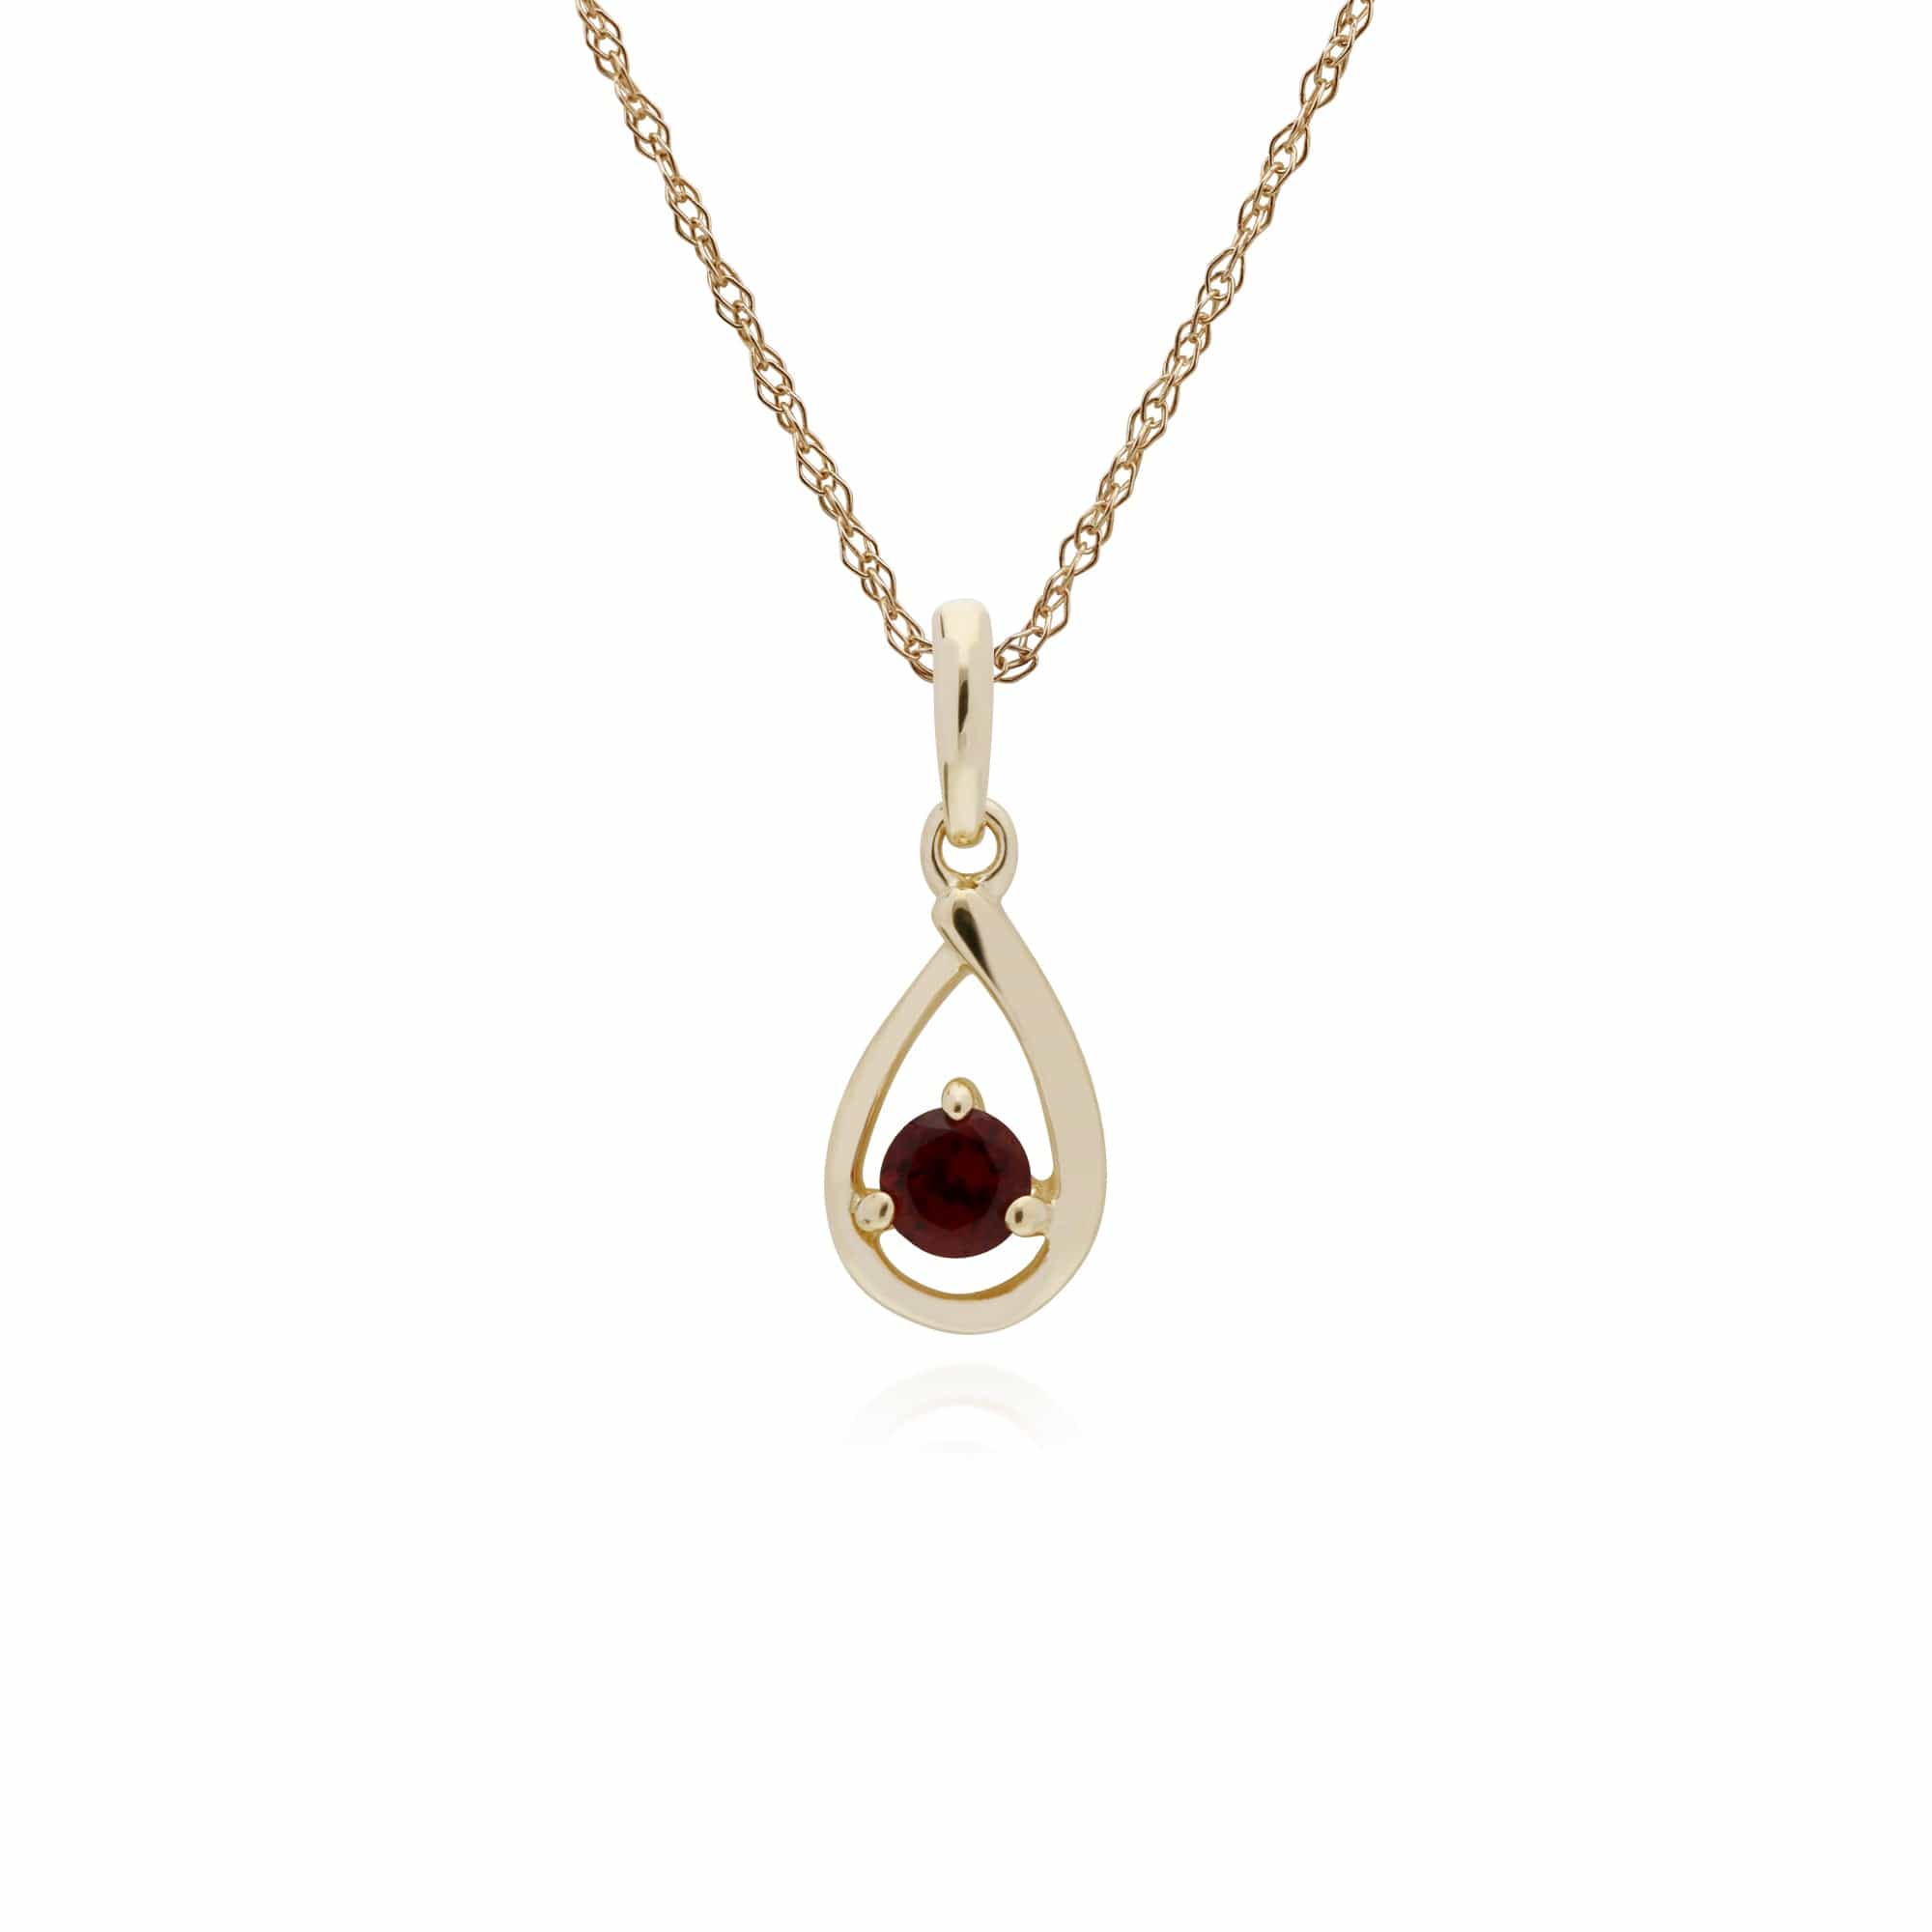 135E1190049-135P1551049 Classic Round Garnet Single Stone Tear Drop Earrings & Necklace Set in 9ct Yellow Gold 3